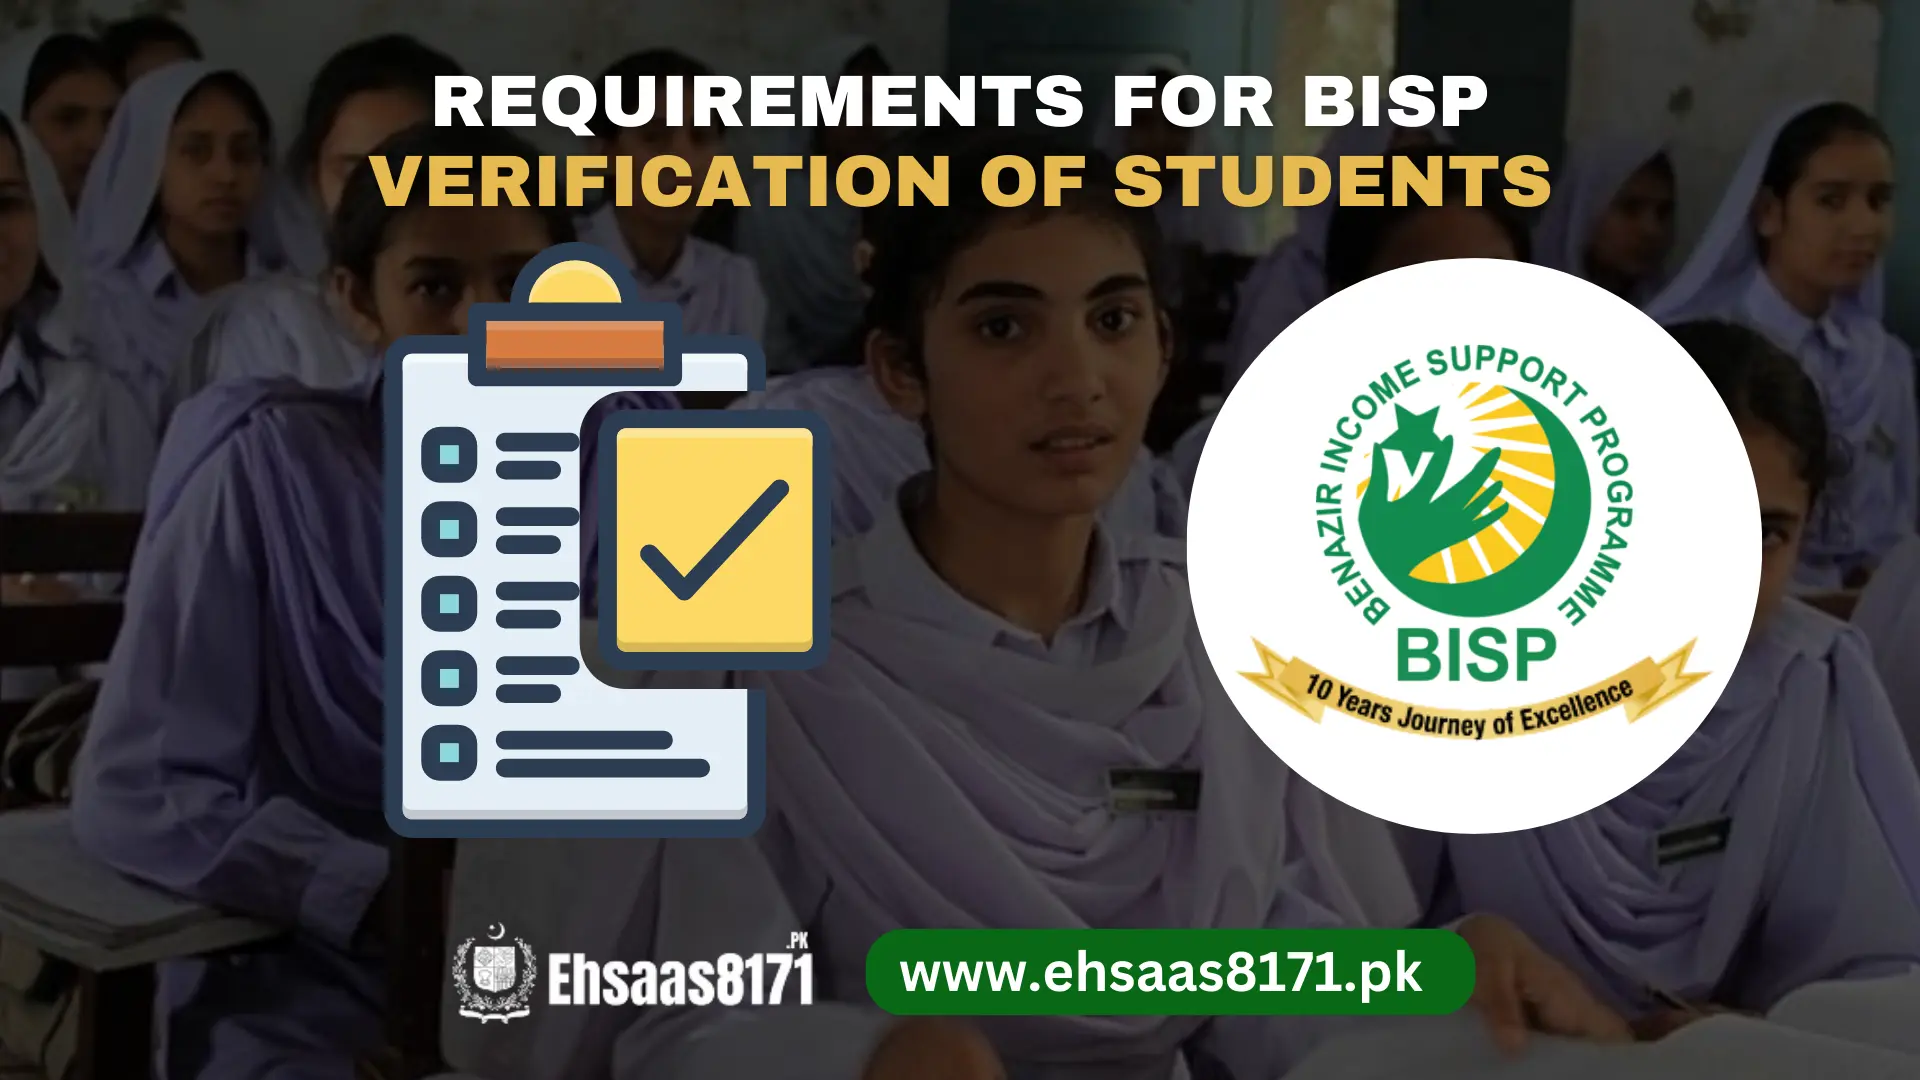 Requirements for BISP verification of students